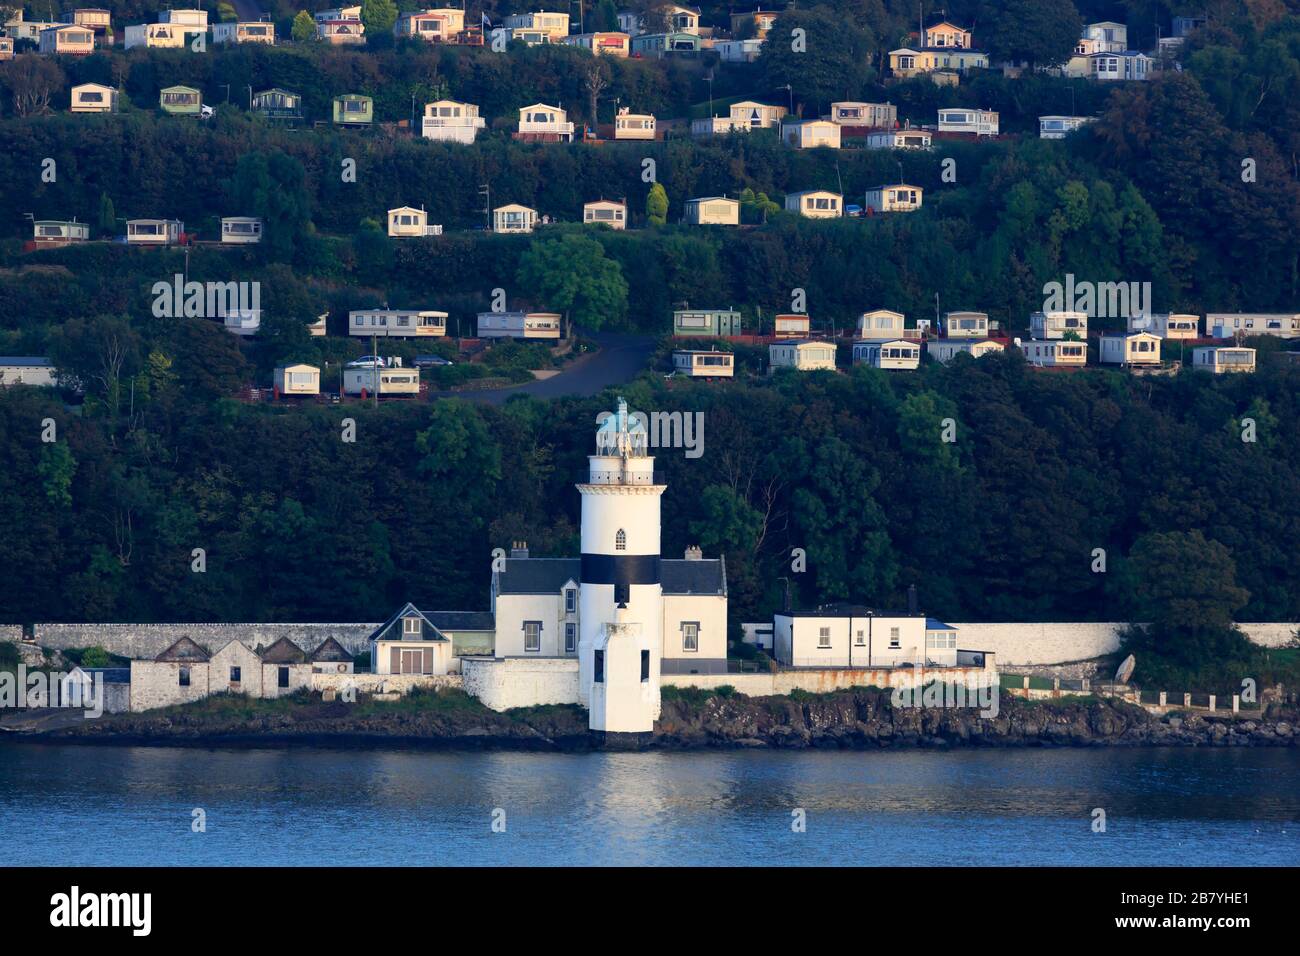 Cloch Lighthouse, Gourock Town, Firth of Clyde, Scotland, United Kingdom Stock Photo